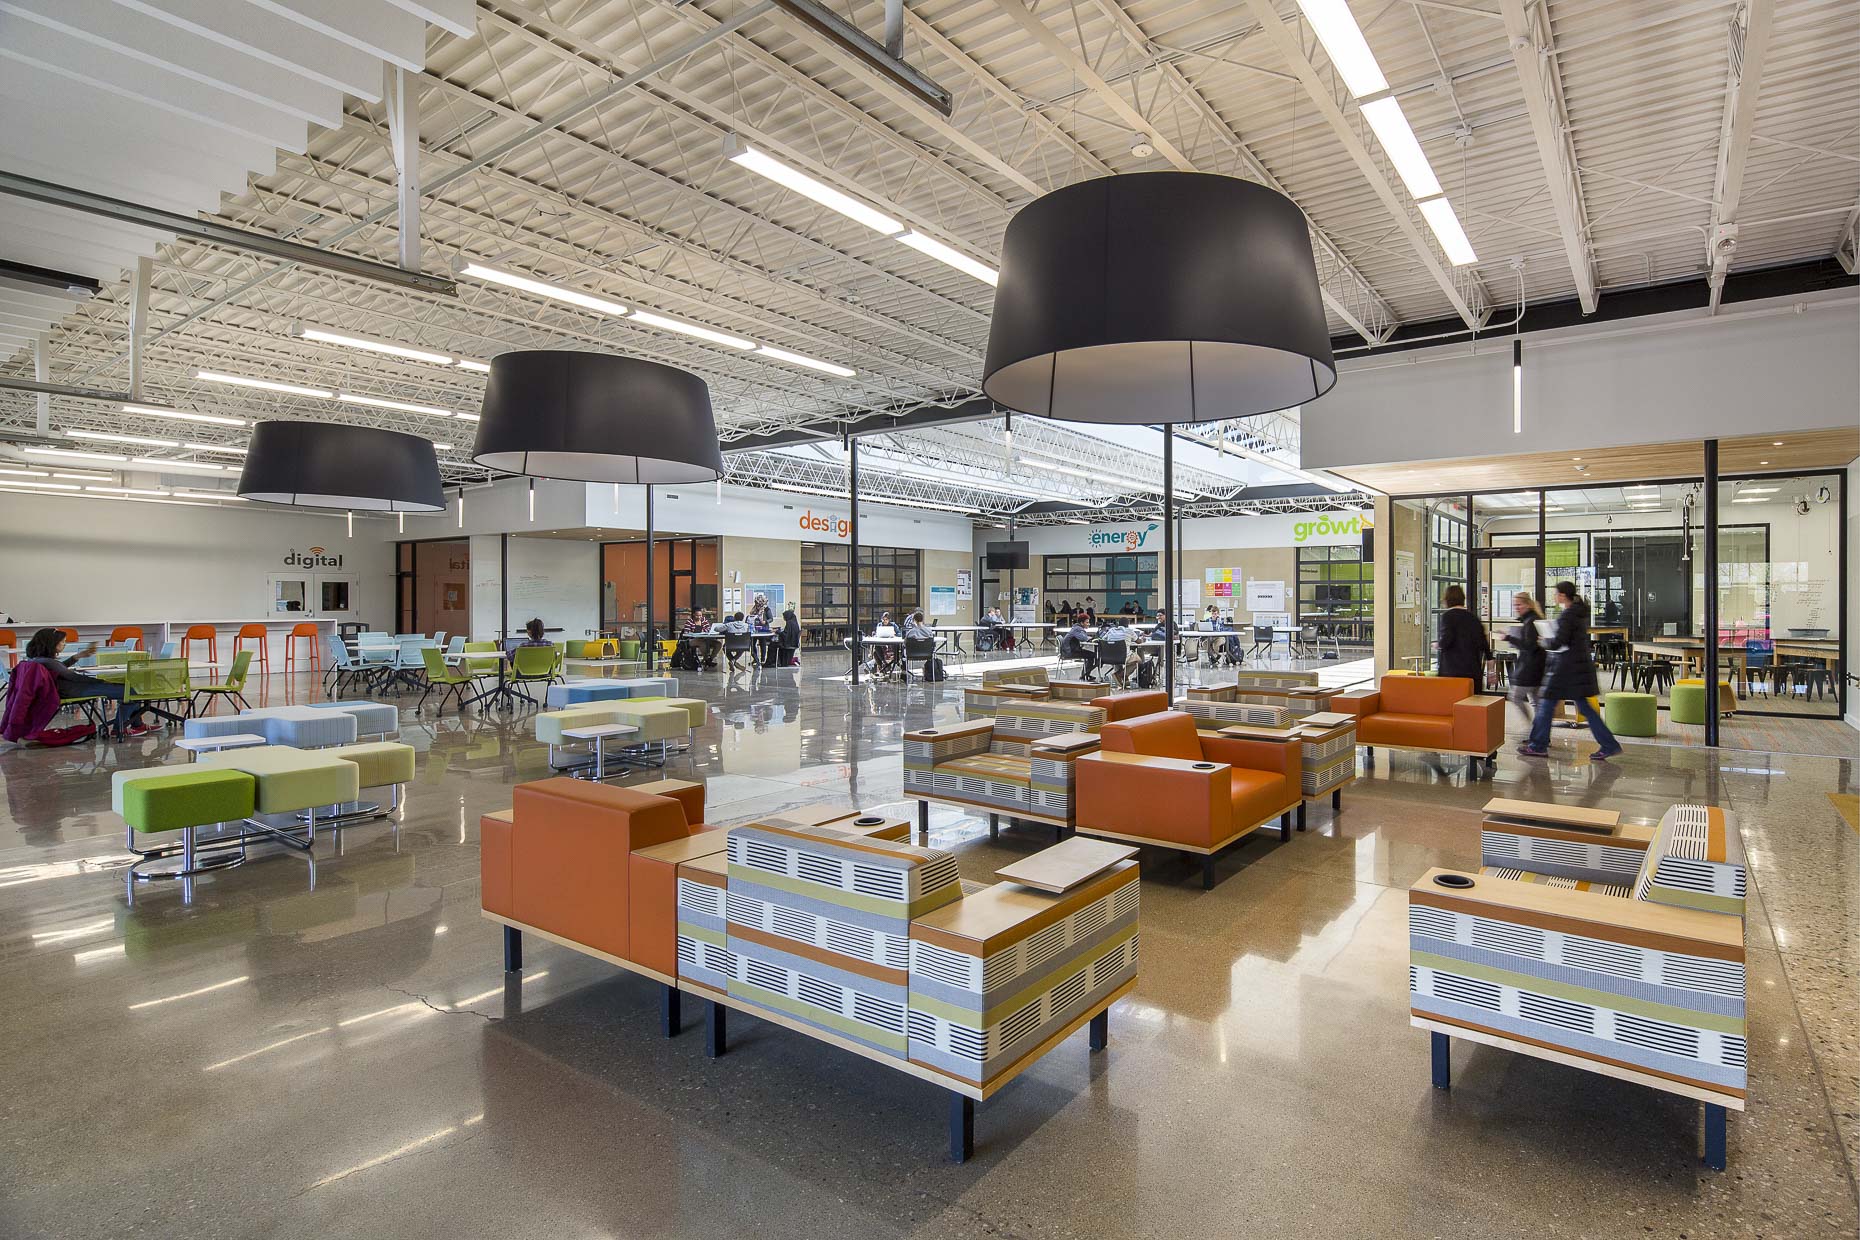 Past Innovation Lab by WSA Studio photographed by Brad Feinknopf based in Columbus, Ohio